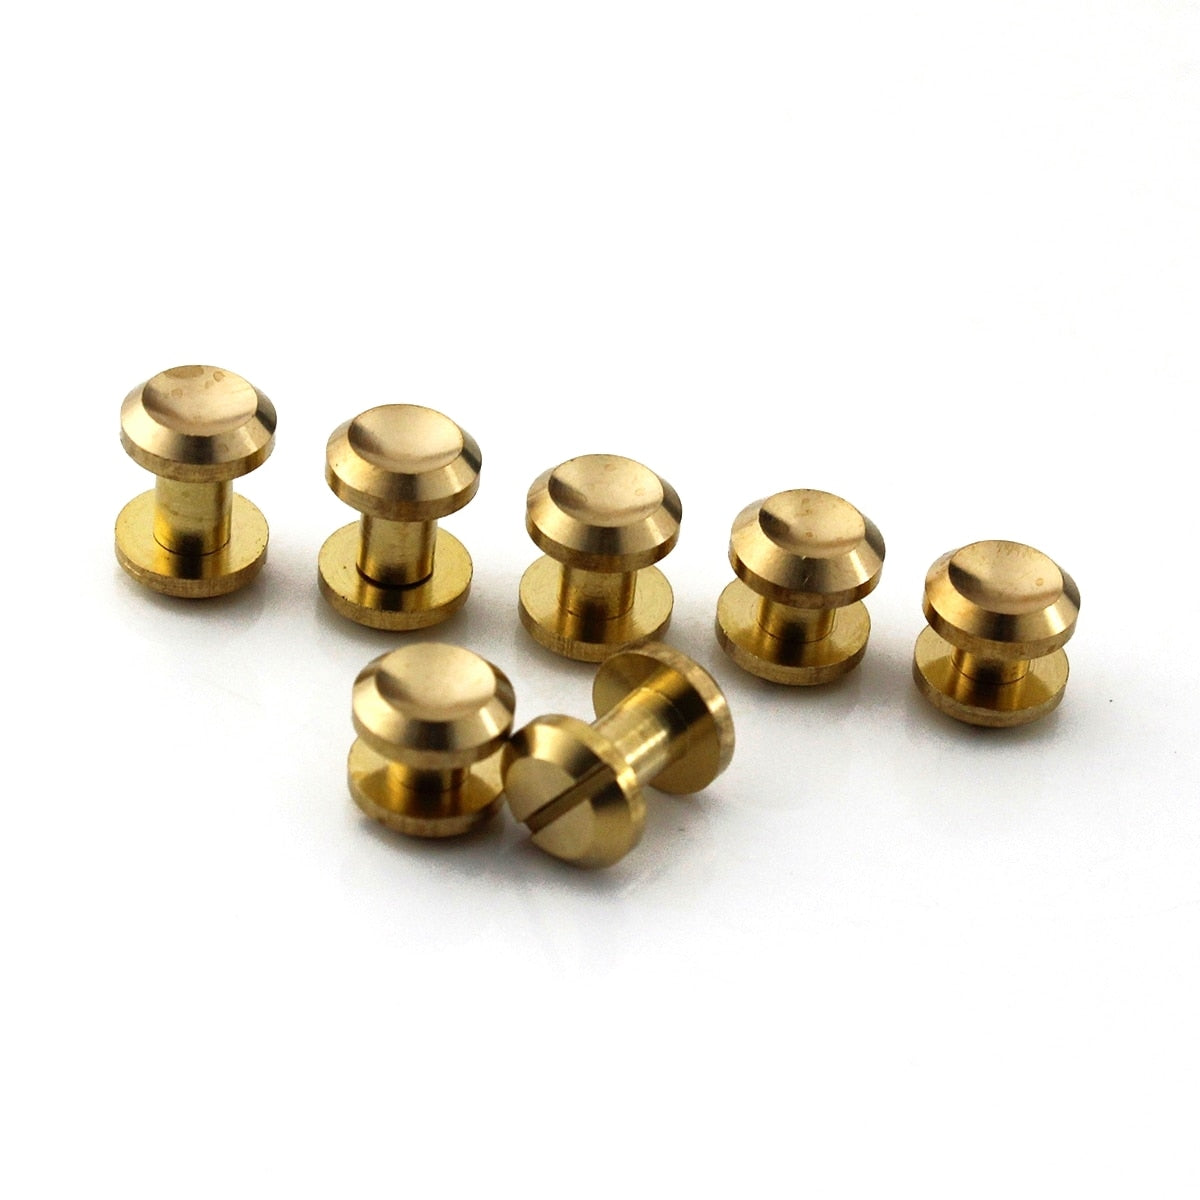 B 10pcs Solid Brass Concave Head  Binding Chicago Screws Nail Rivets for Photo Album Leather Craft Studs Belt Wallet Fasteners